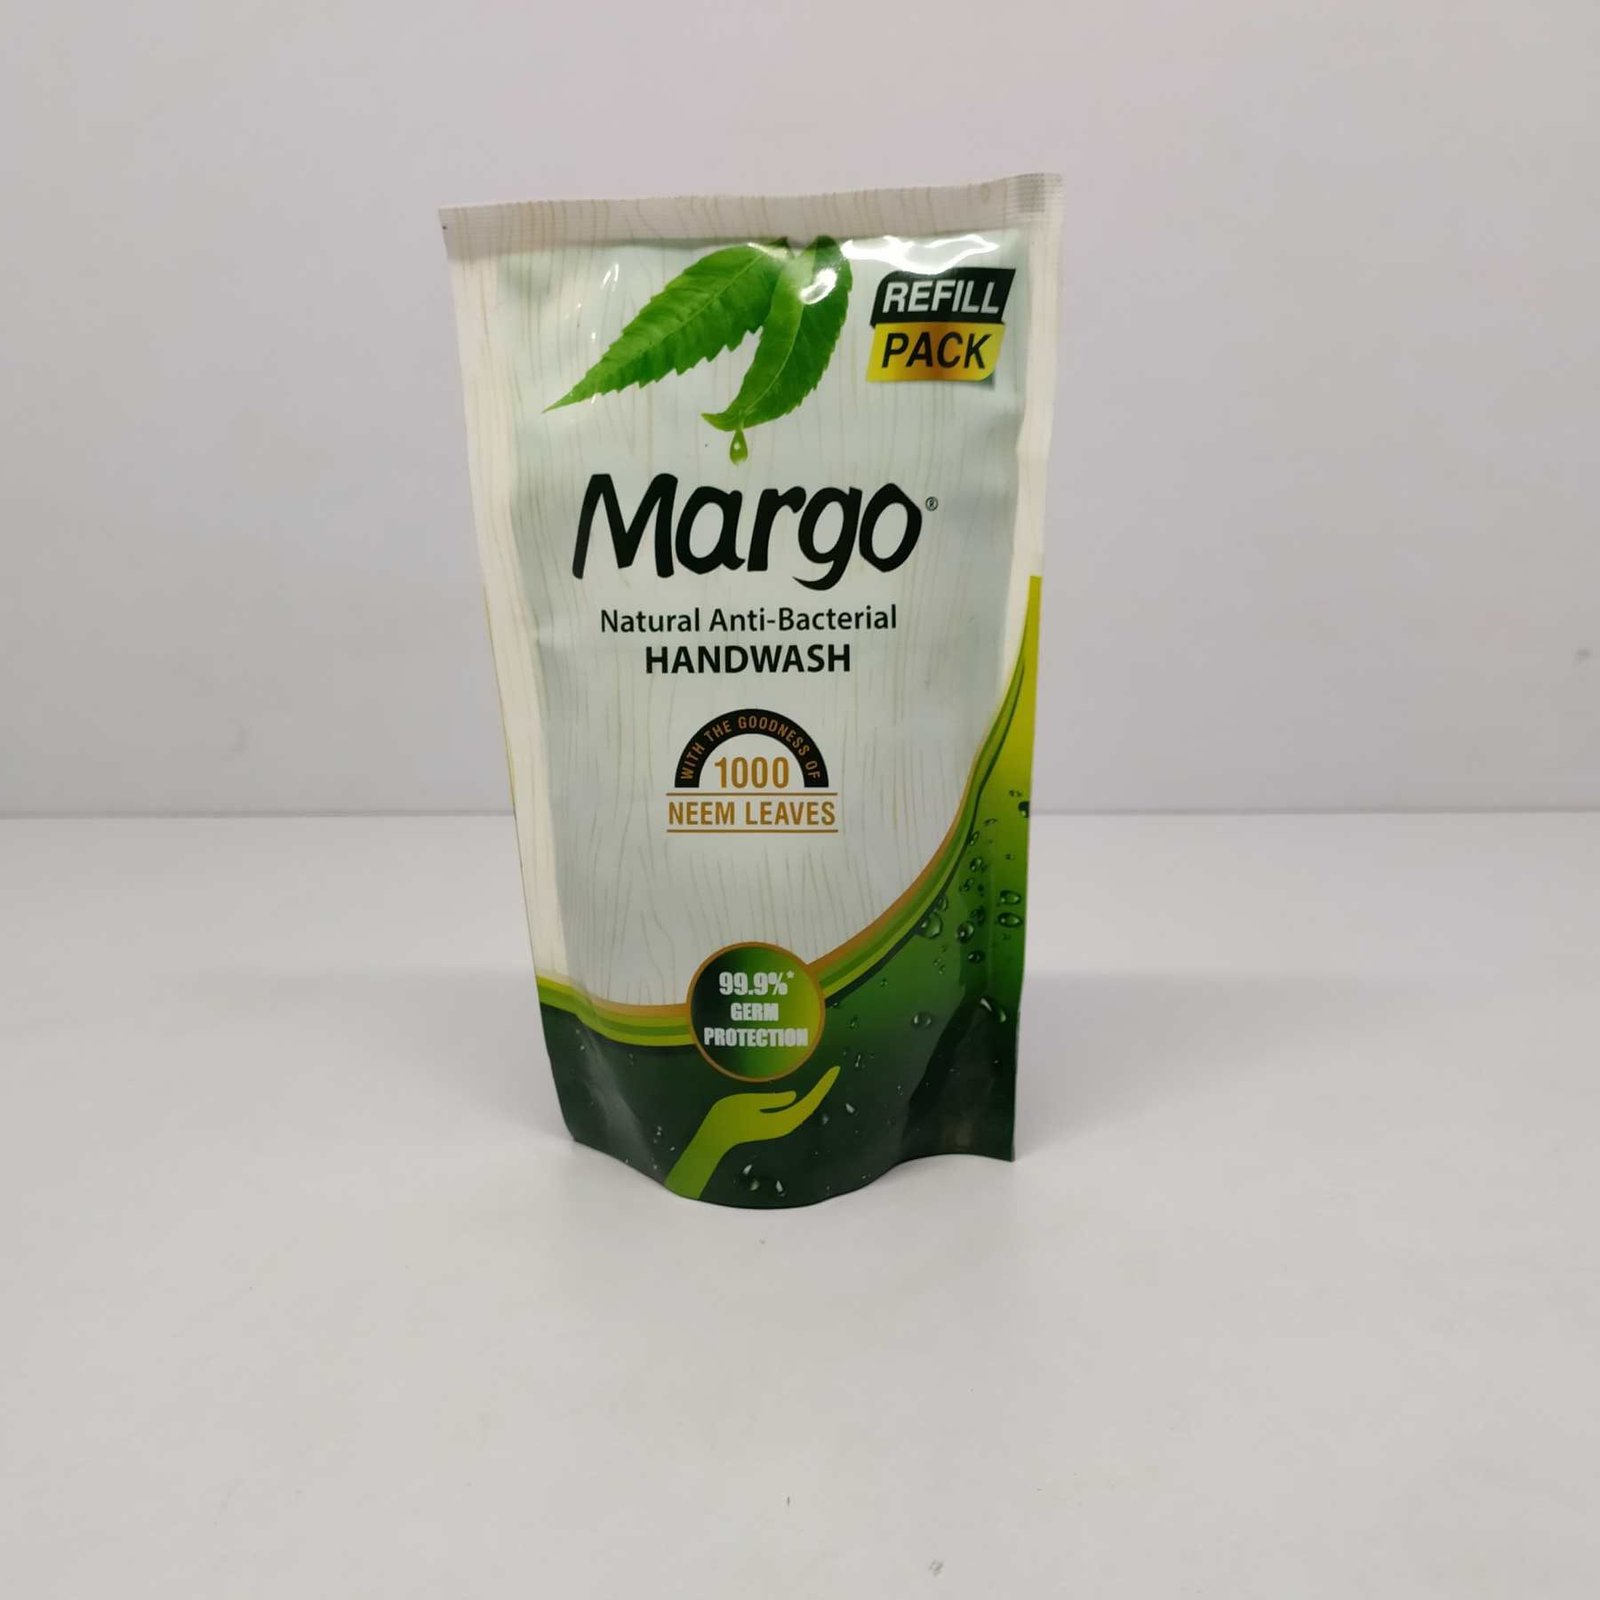 Margo natural anti bacteria hand wash 100% neem leaves 99.9% germ protection,175ml